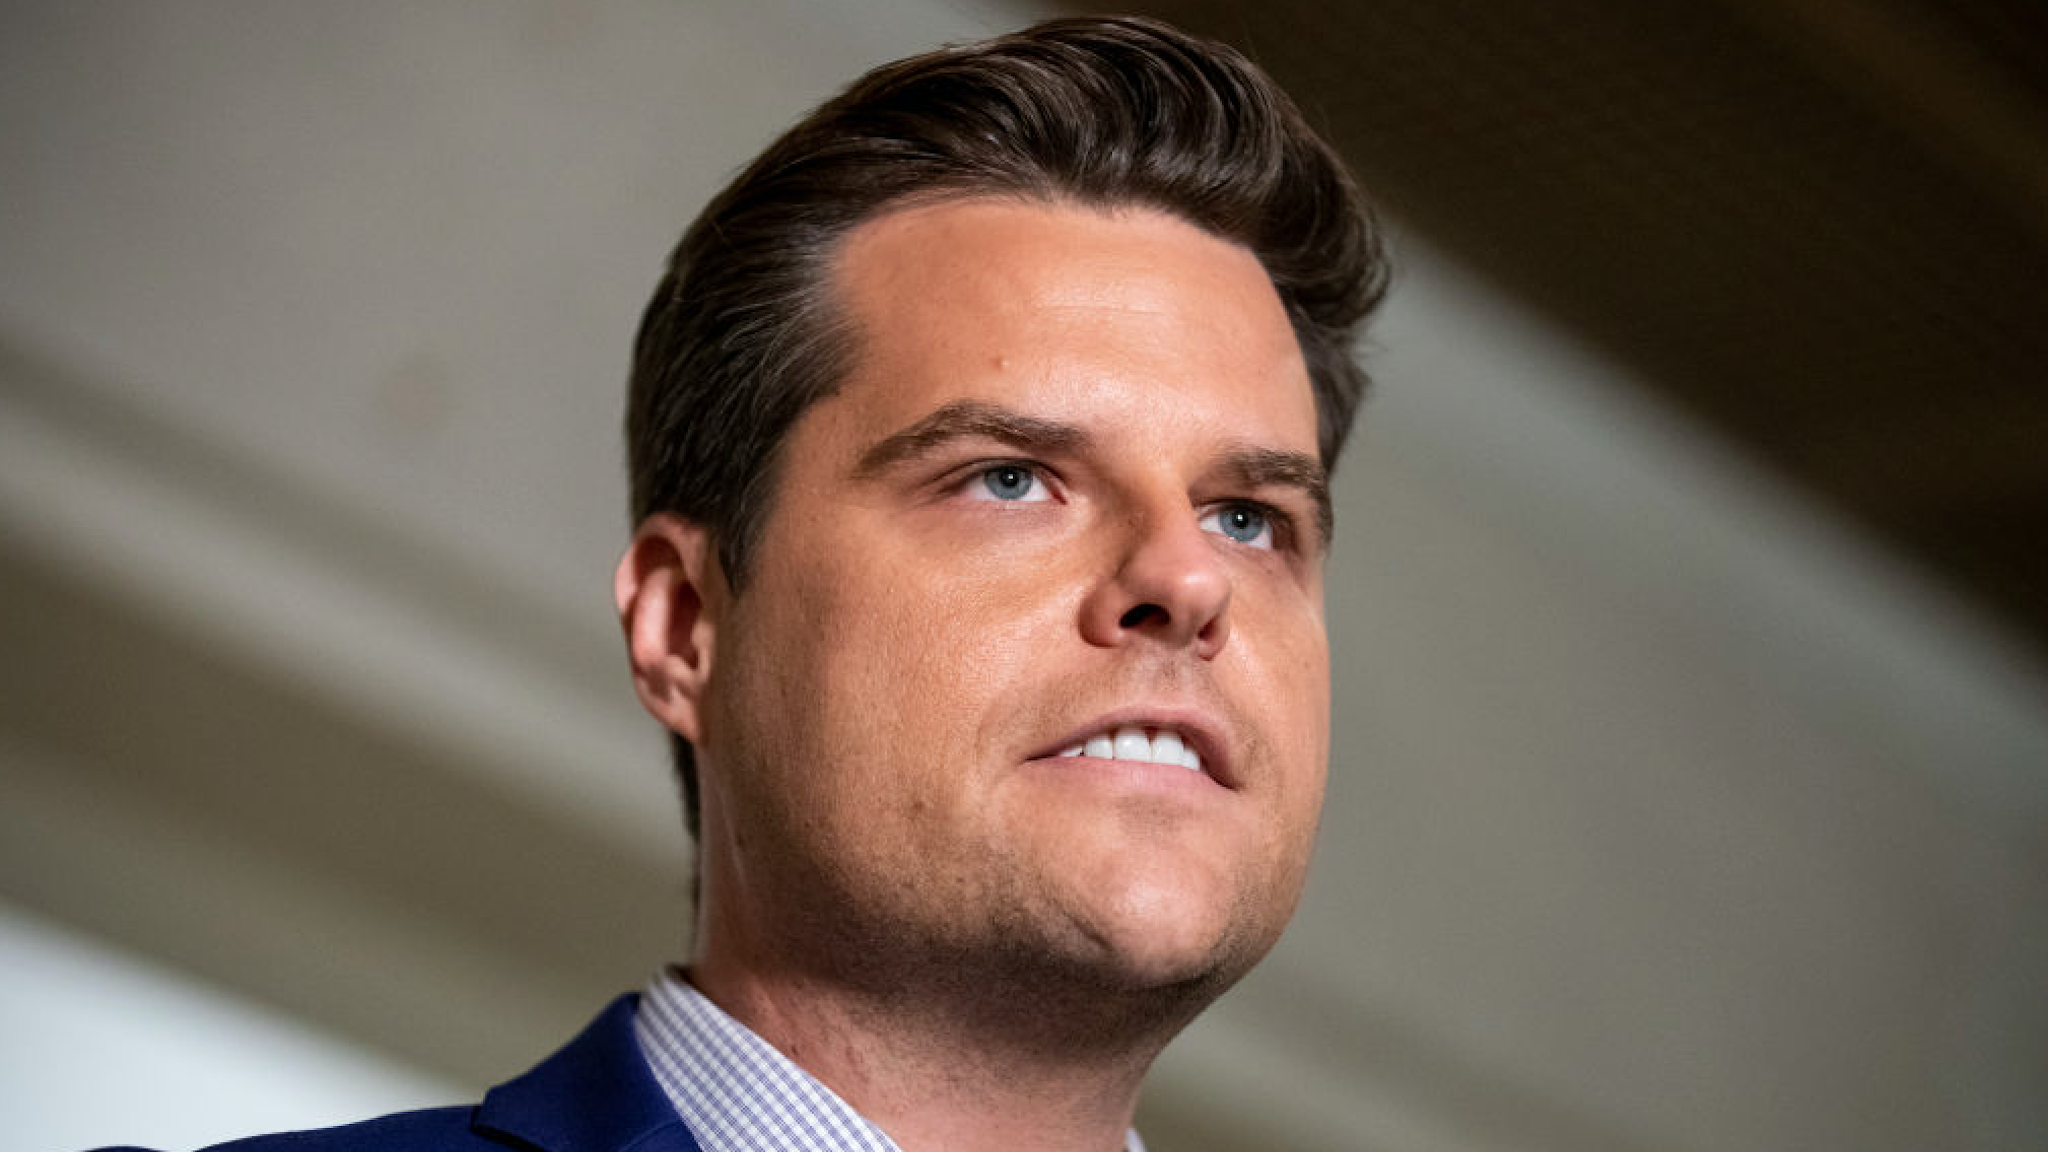 U.S. Rep. Matt Gaetz (R-FL) speaks to the media outside of the Sensitive Compartmented Information Facility (SCIF) during the continued House impeachment inquiry against President Donald Trump at the U.S. Capitol on October 30, 2019 in Washington, DC.